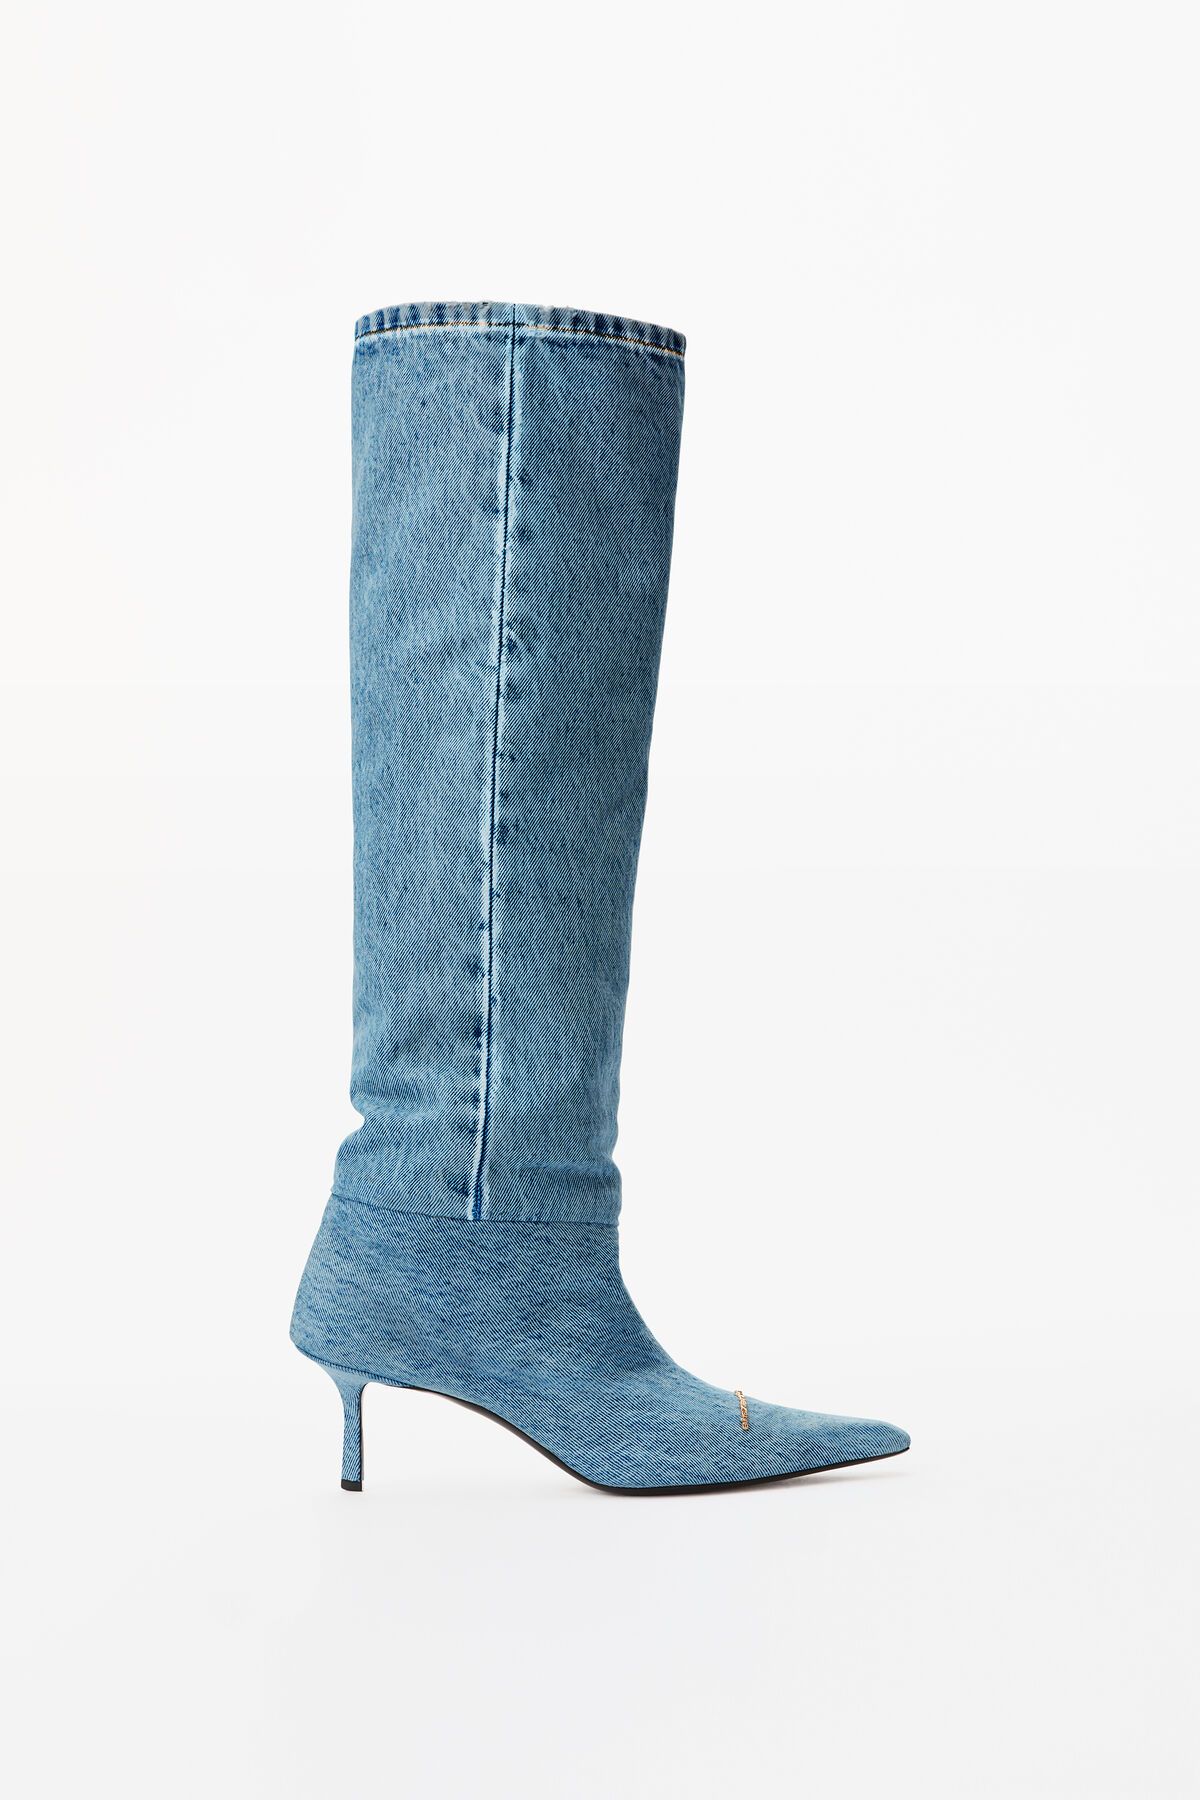 VIOLA 65 SLOUCH BOOT IN WASHED DENIM | Alexander Wang